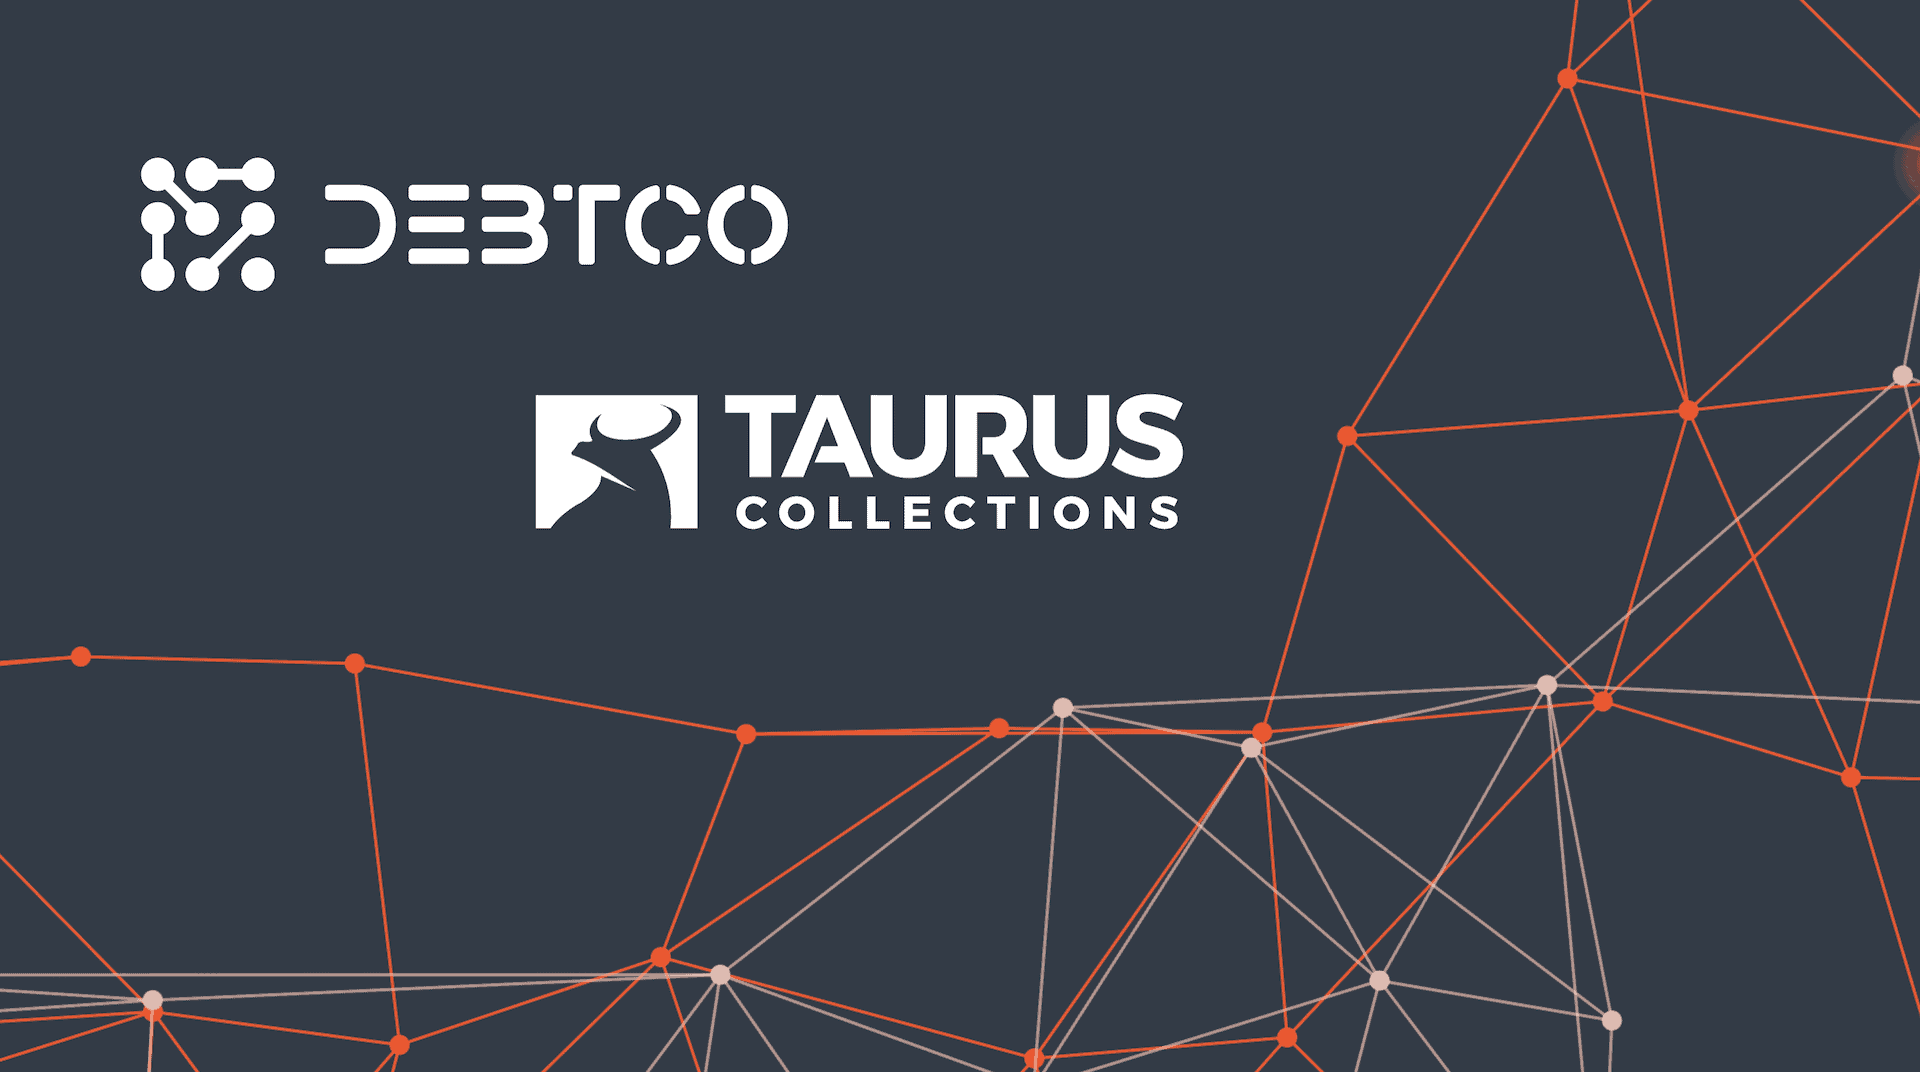 Learn about how DebtCo UK and Taurus Collections mergers to offer expanded debt collection services